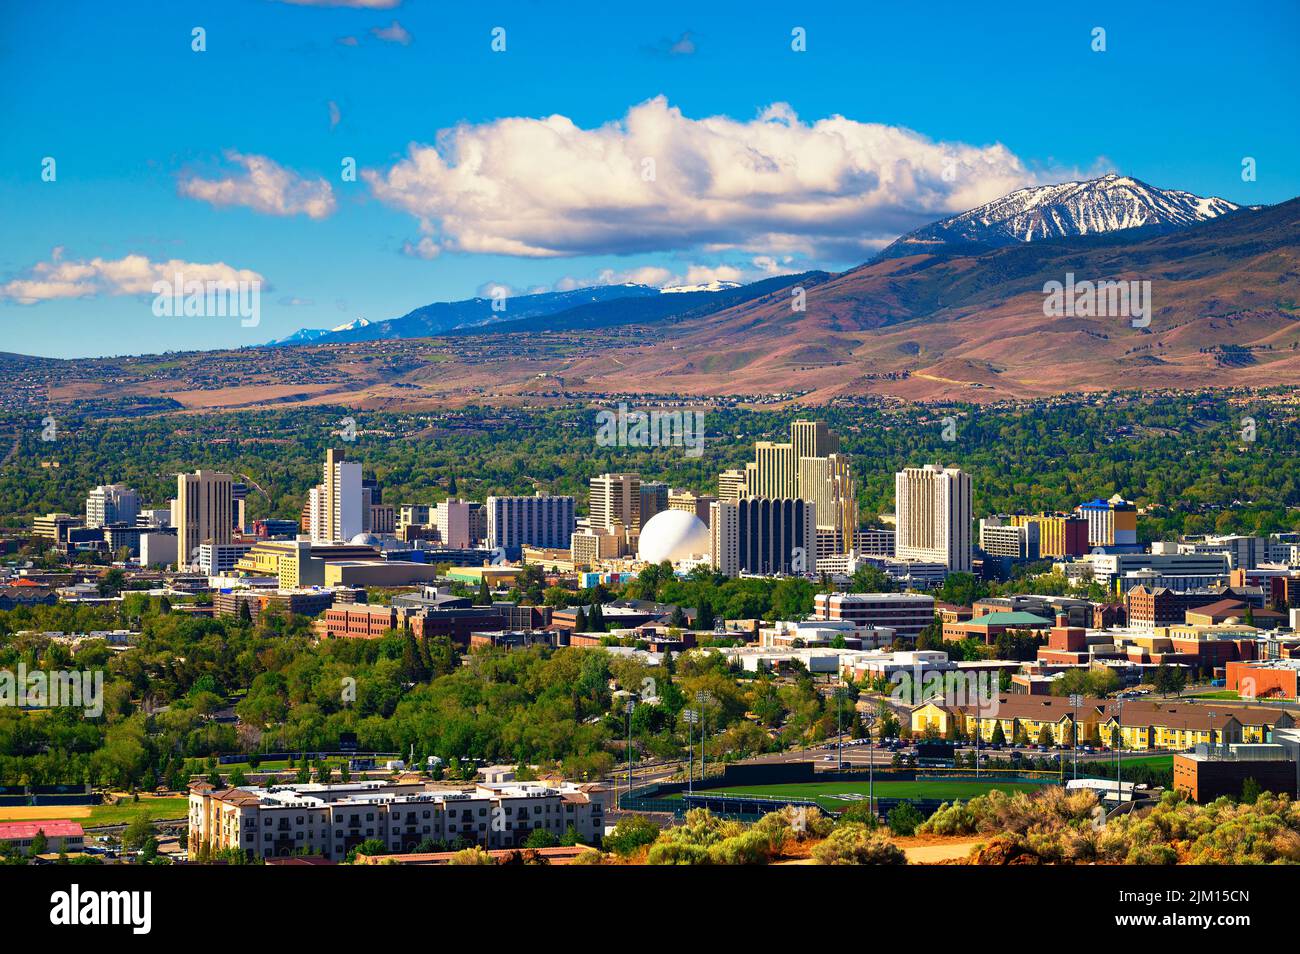 Downtown Reno skyline, Nevada, with hotels, casinos and surrounding mountains Stock Photo